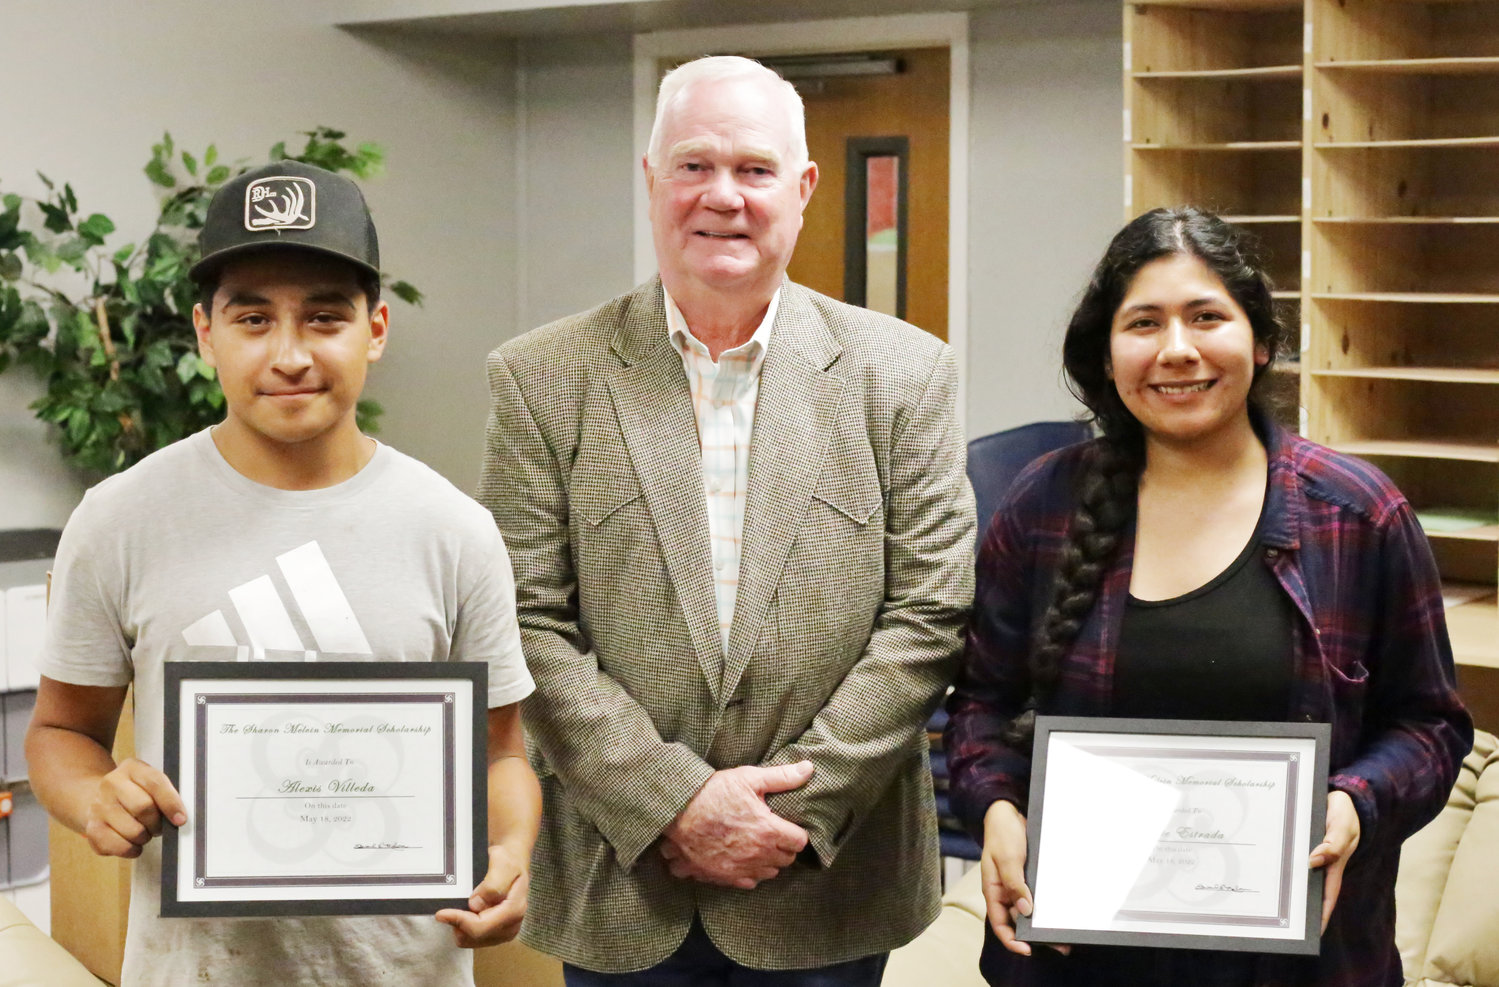 Mineola graduates Maggie Estrada and Alexis Villeda, with Dick Melvin, earned selection as the initial recipients of the Sharon Melvin Memorial Scholarship.